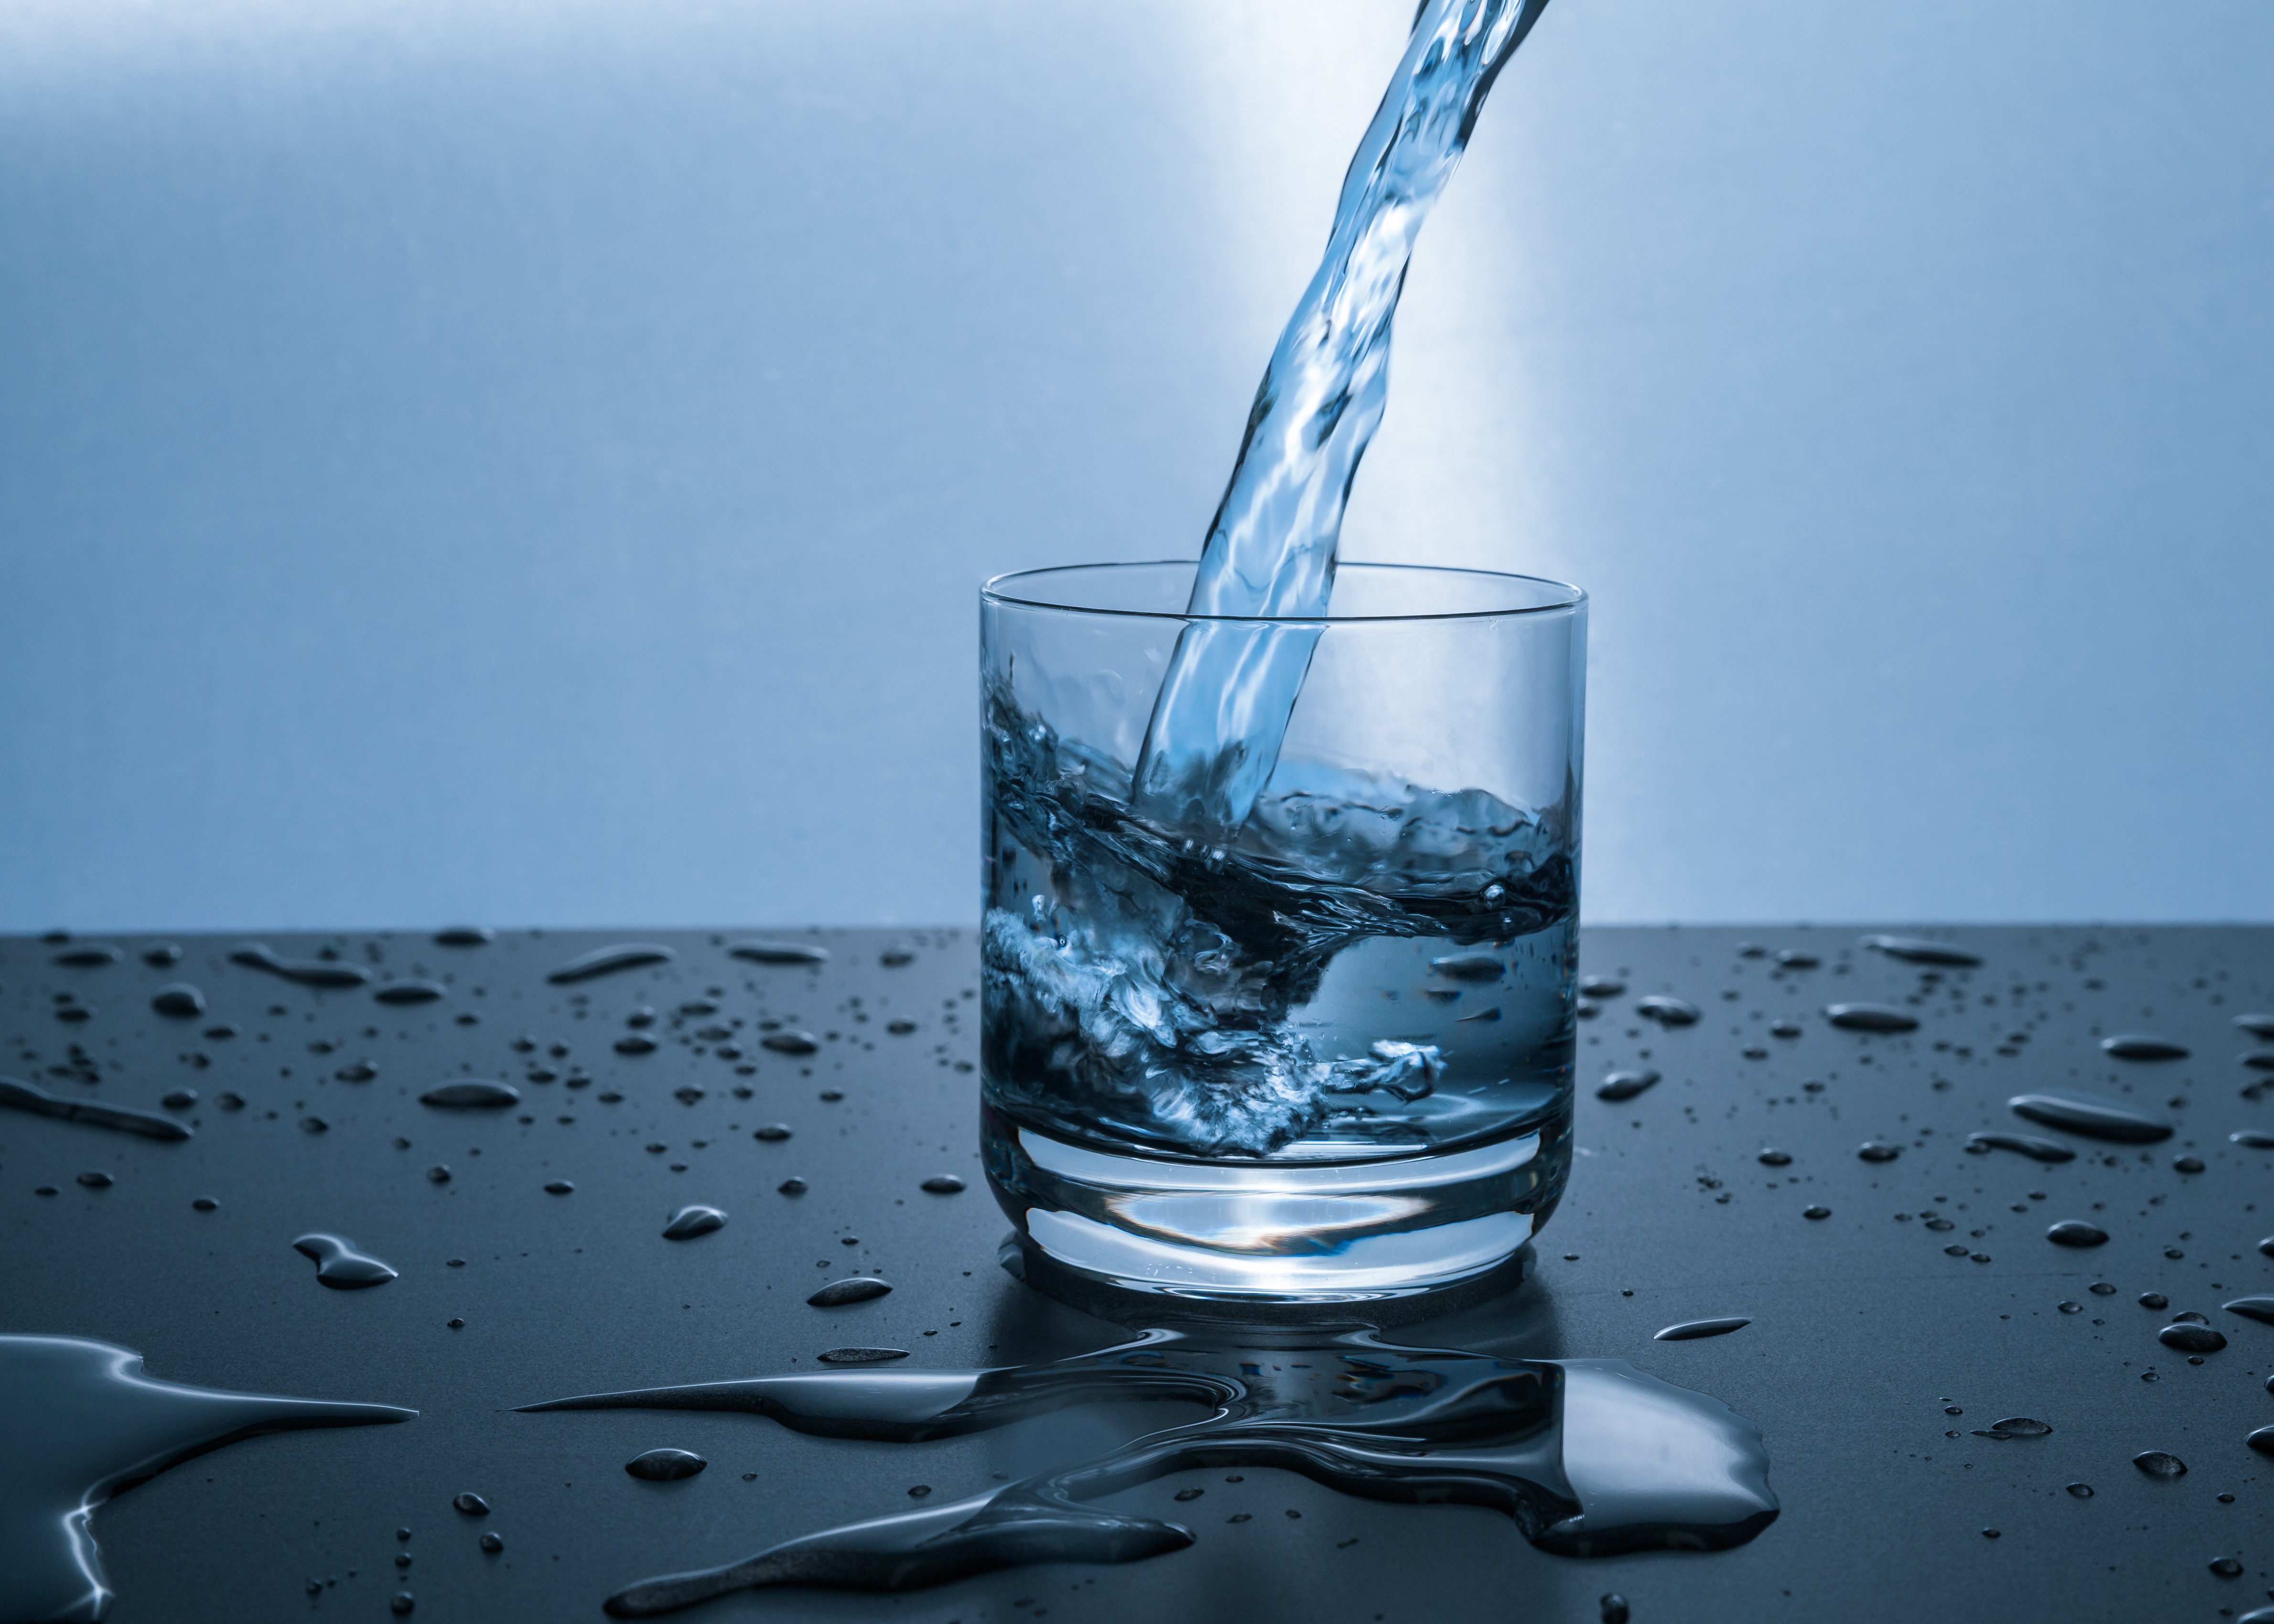 Nitrate in Drinking Water Increases the Risk of Colorectal Cancer